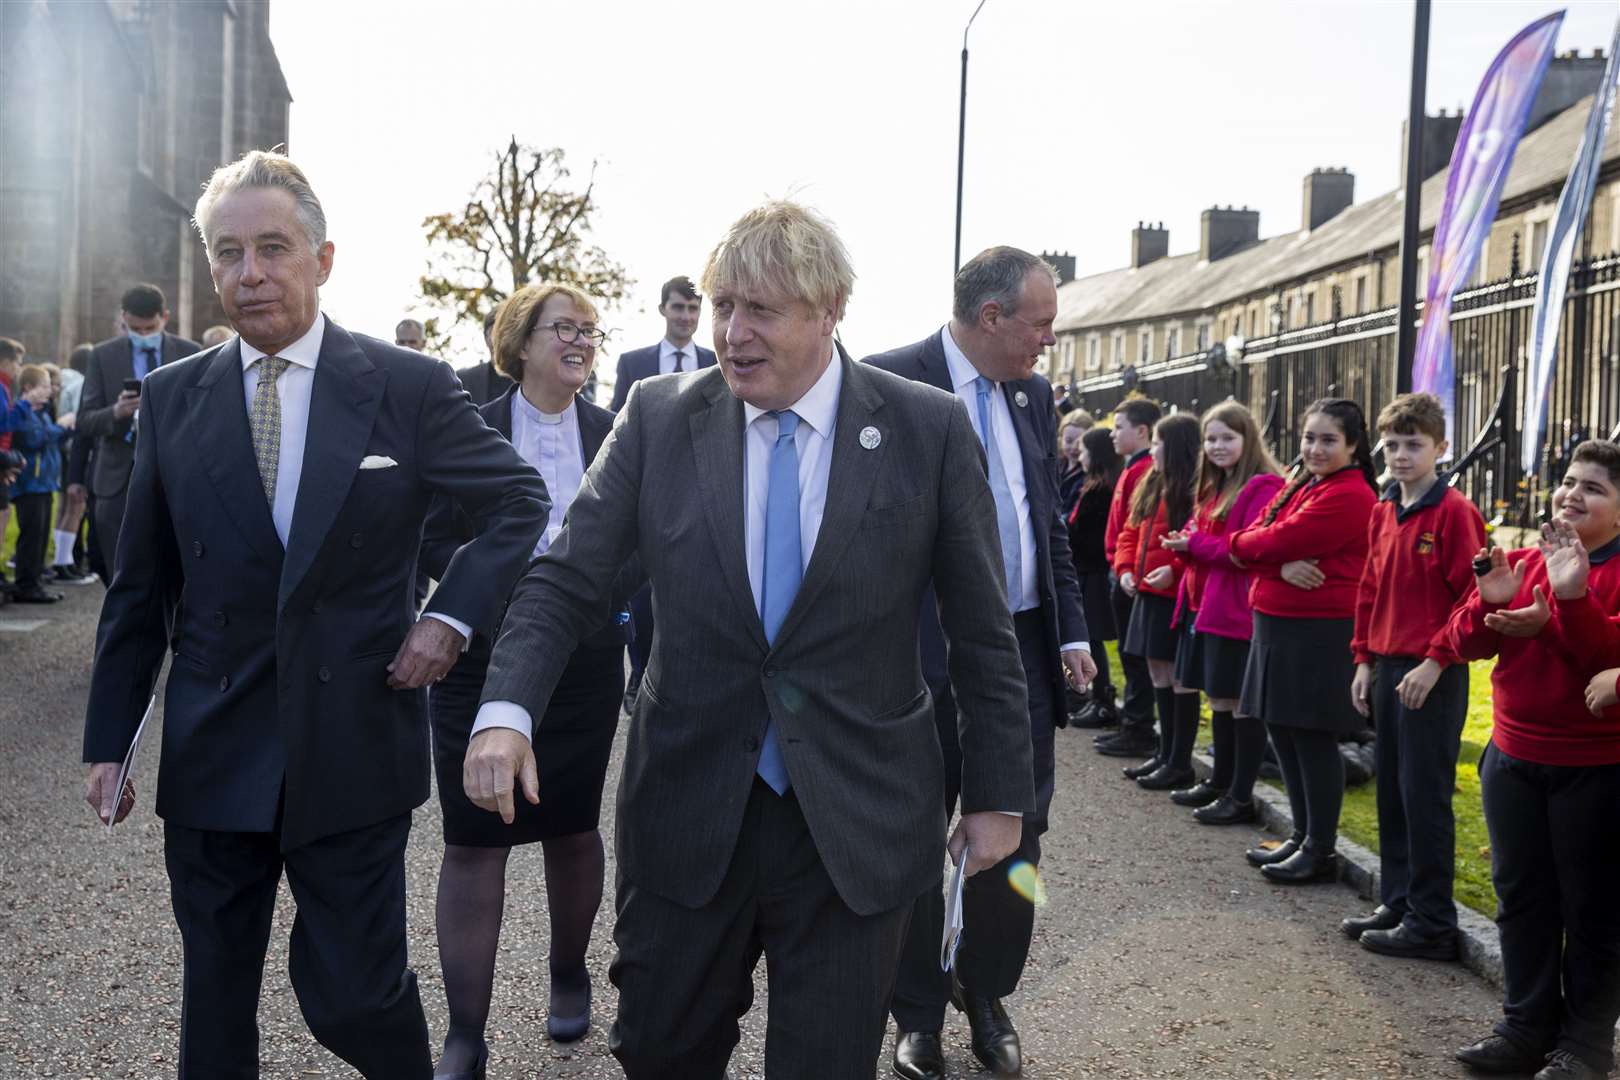 Prime Minister Boris Johnson (centre) attends a service to mark the centenary of Northern Ireland at St Patrick’s Cathedral in Armagh (Liam McBurney/PA)